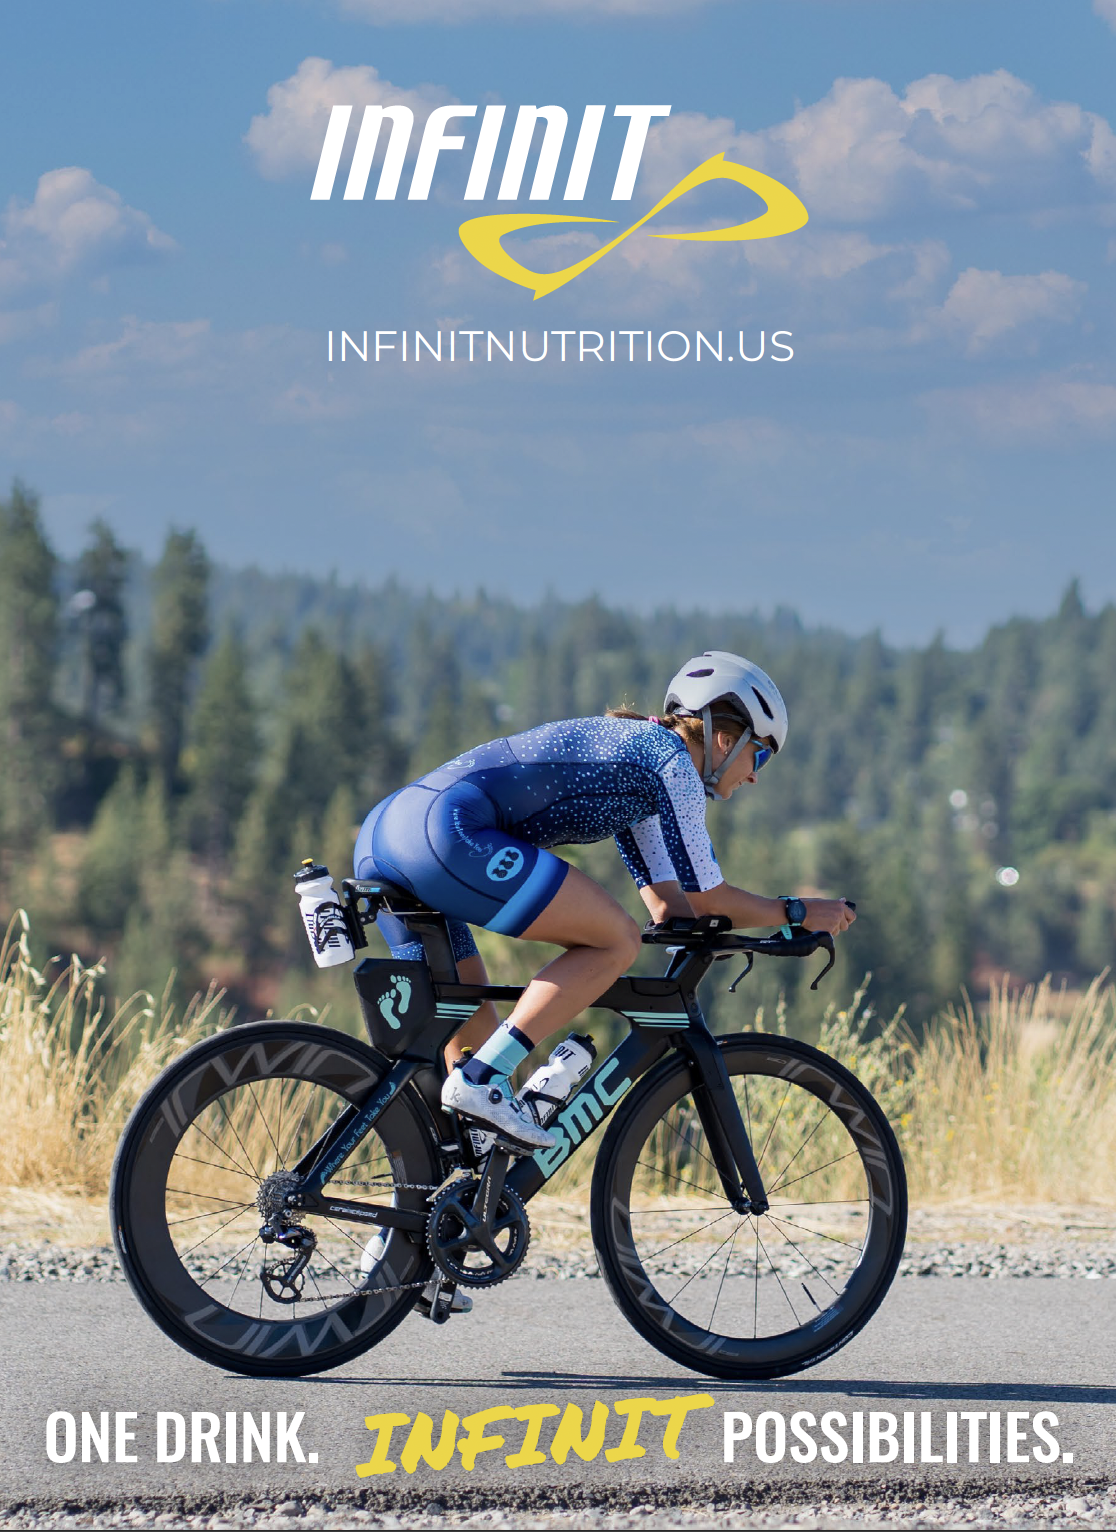 product catalog cover with triathlete riding bike in mountains